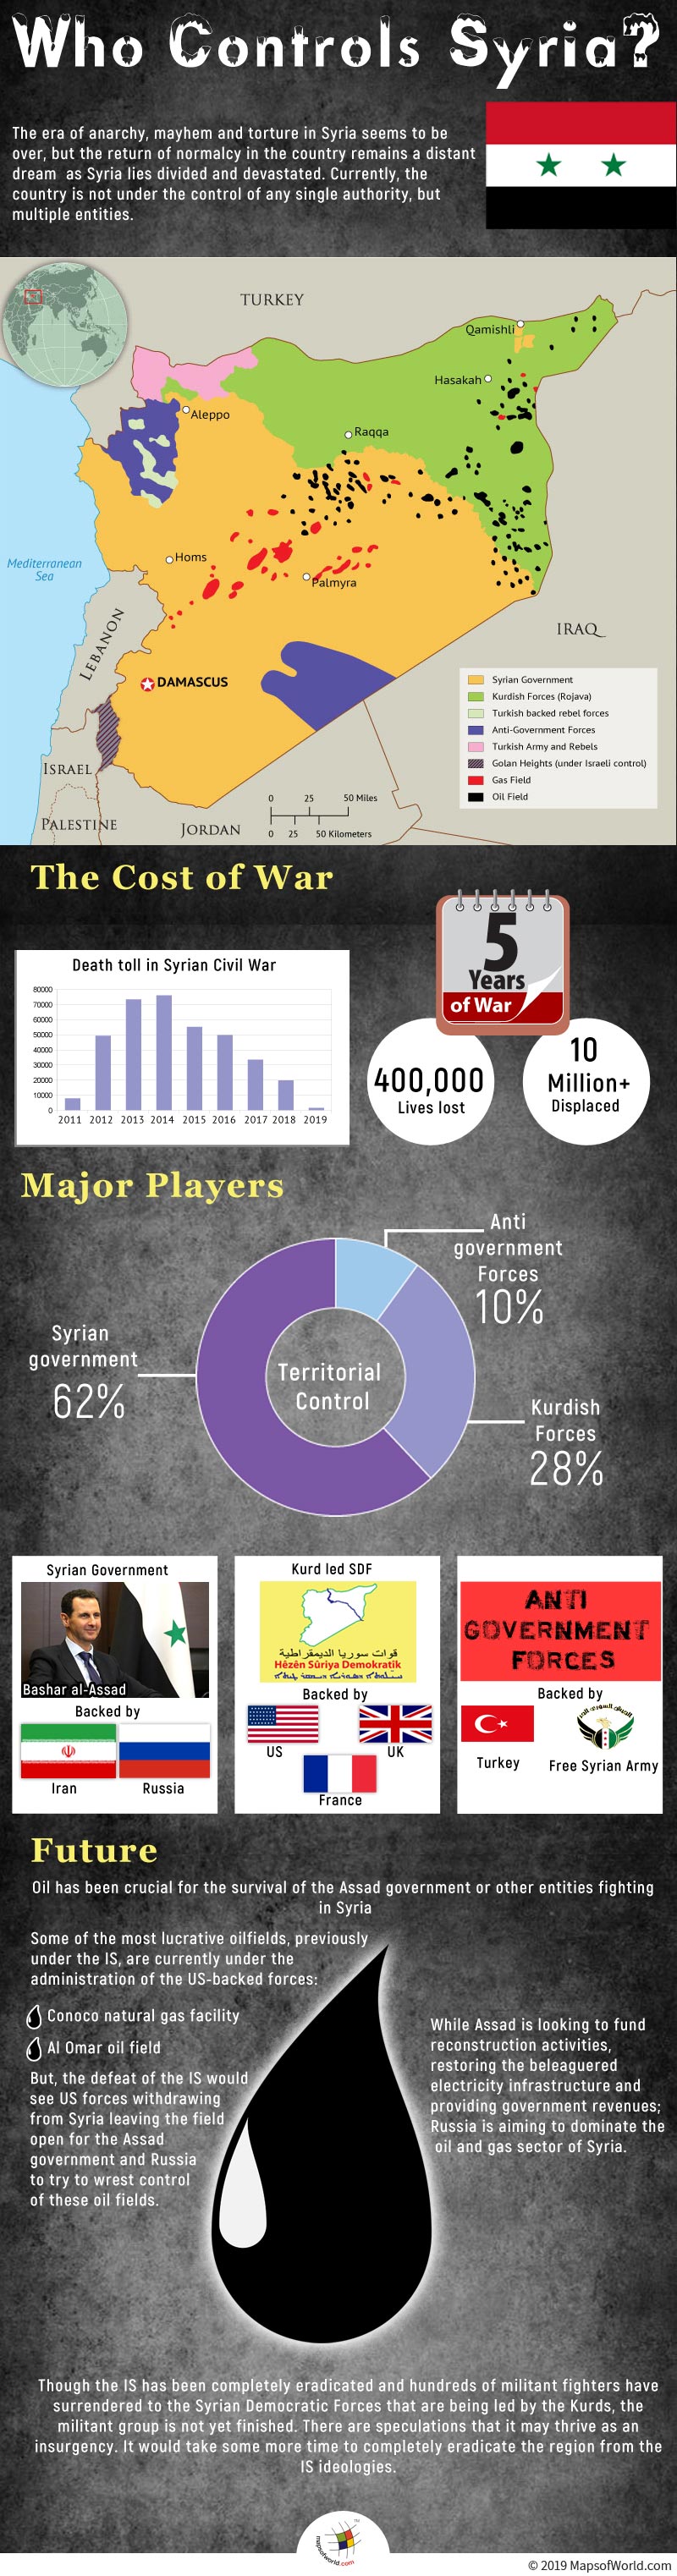 Infographic Giving Details on Who Controls Syria